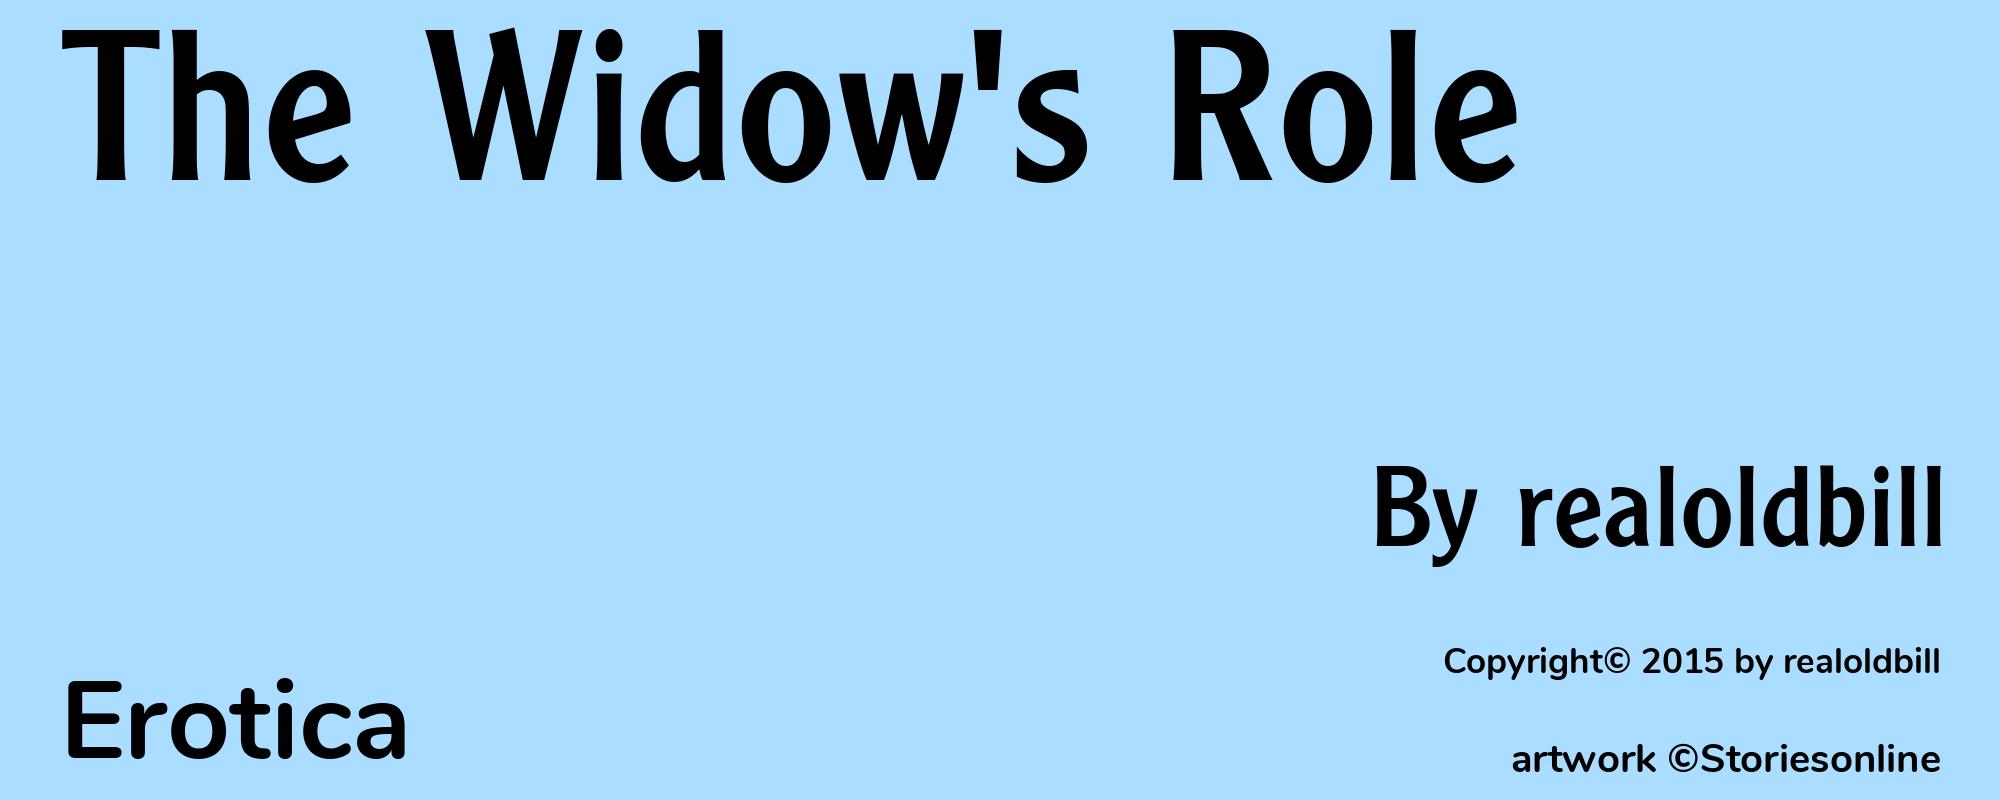 The Widow's Role - Cover